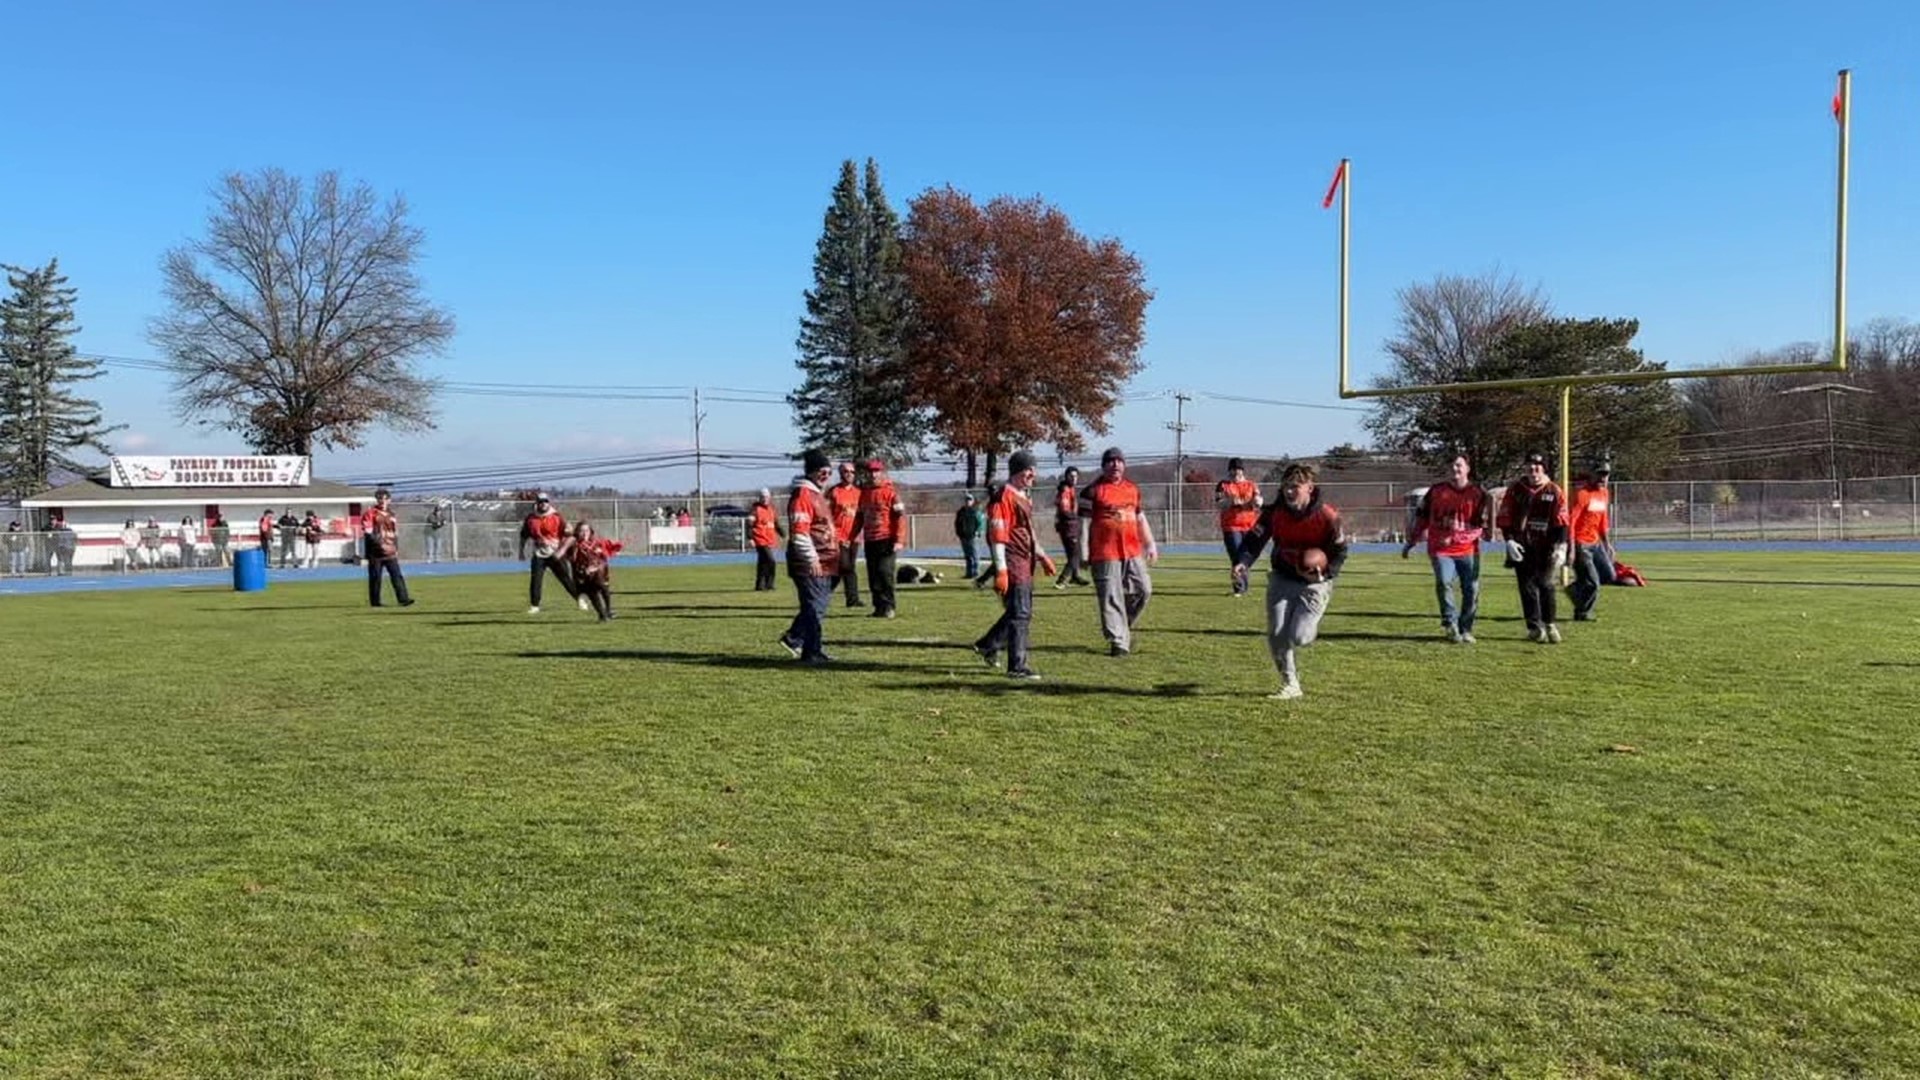 Members and supporters of the Greater Pittston Santa Squad suited up to play some football at Pittston Area High School in Yatesville on Sunday.